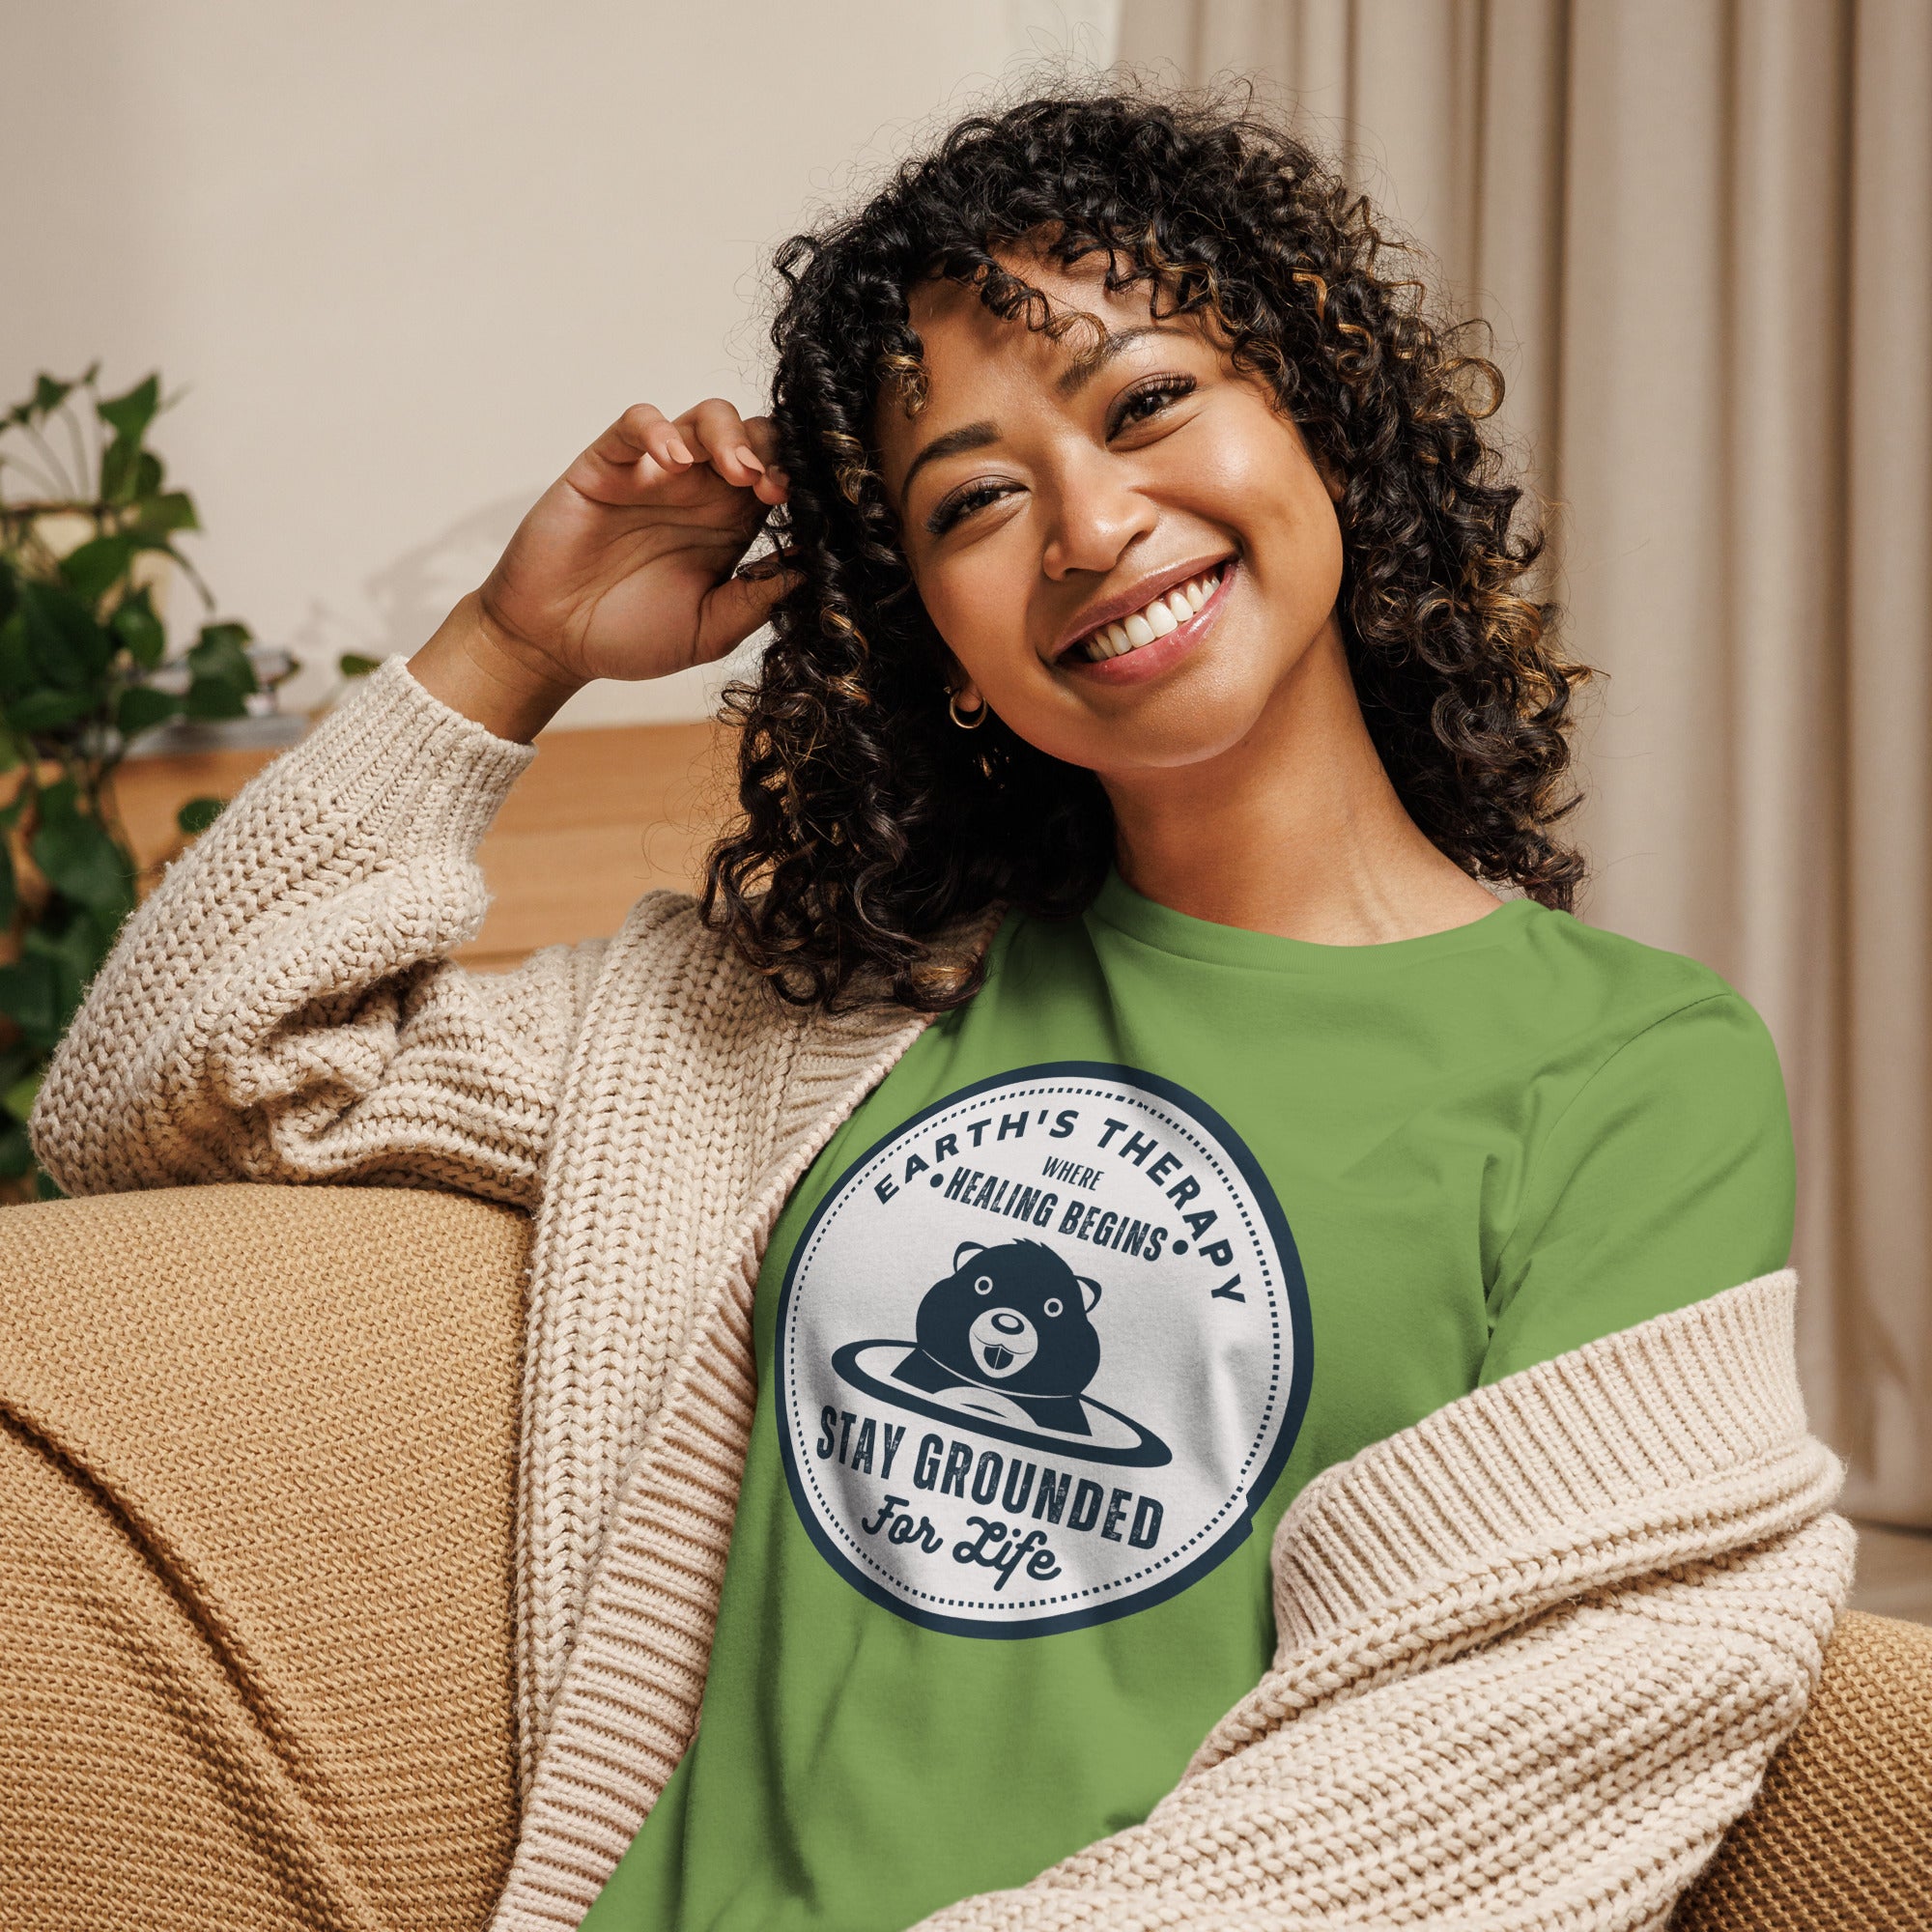 Shop Earth's Therapy Grounding For Life Relaxed T-Shirt | USA Boutique, T-shirts, USA Boutique